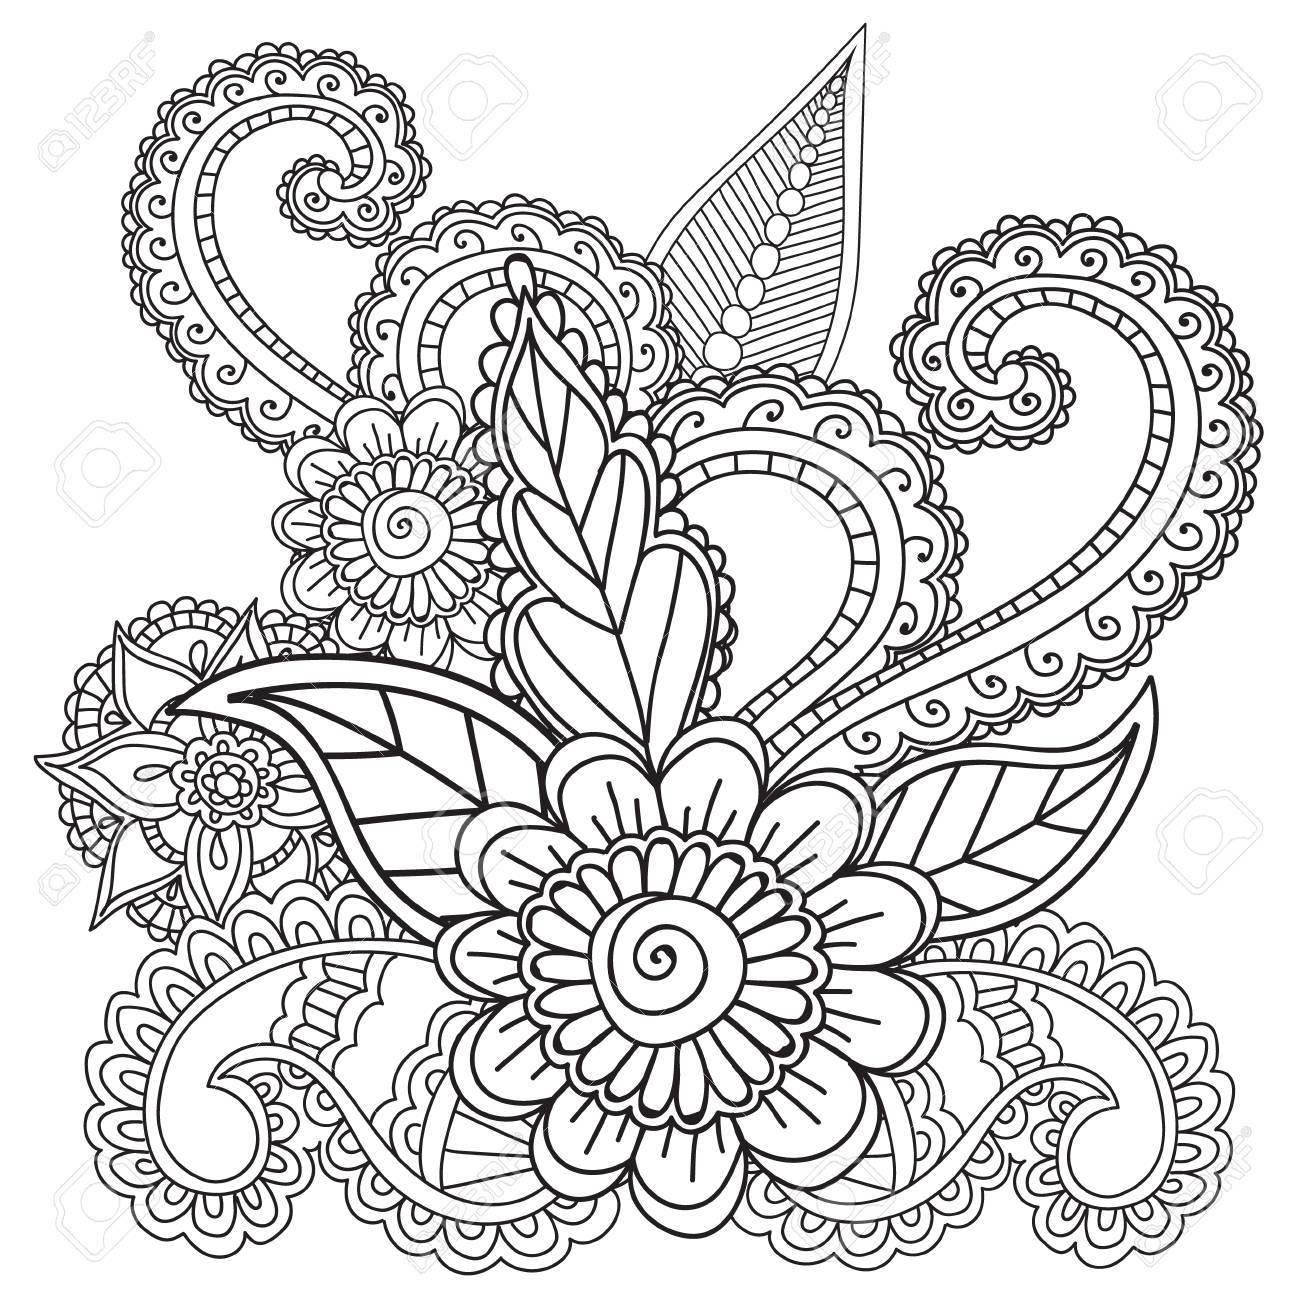 Henna Coloring Pages at GetColorings.com   Free printable colorings ...